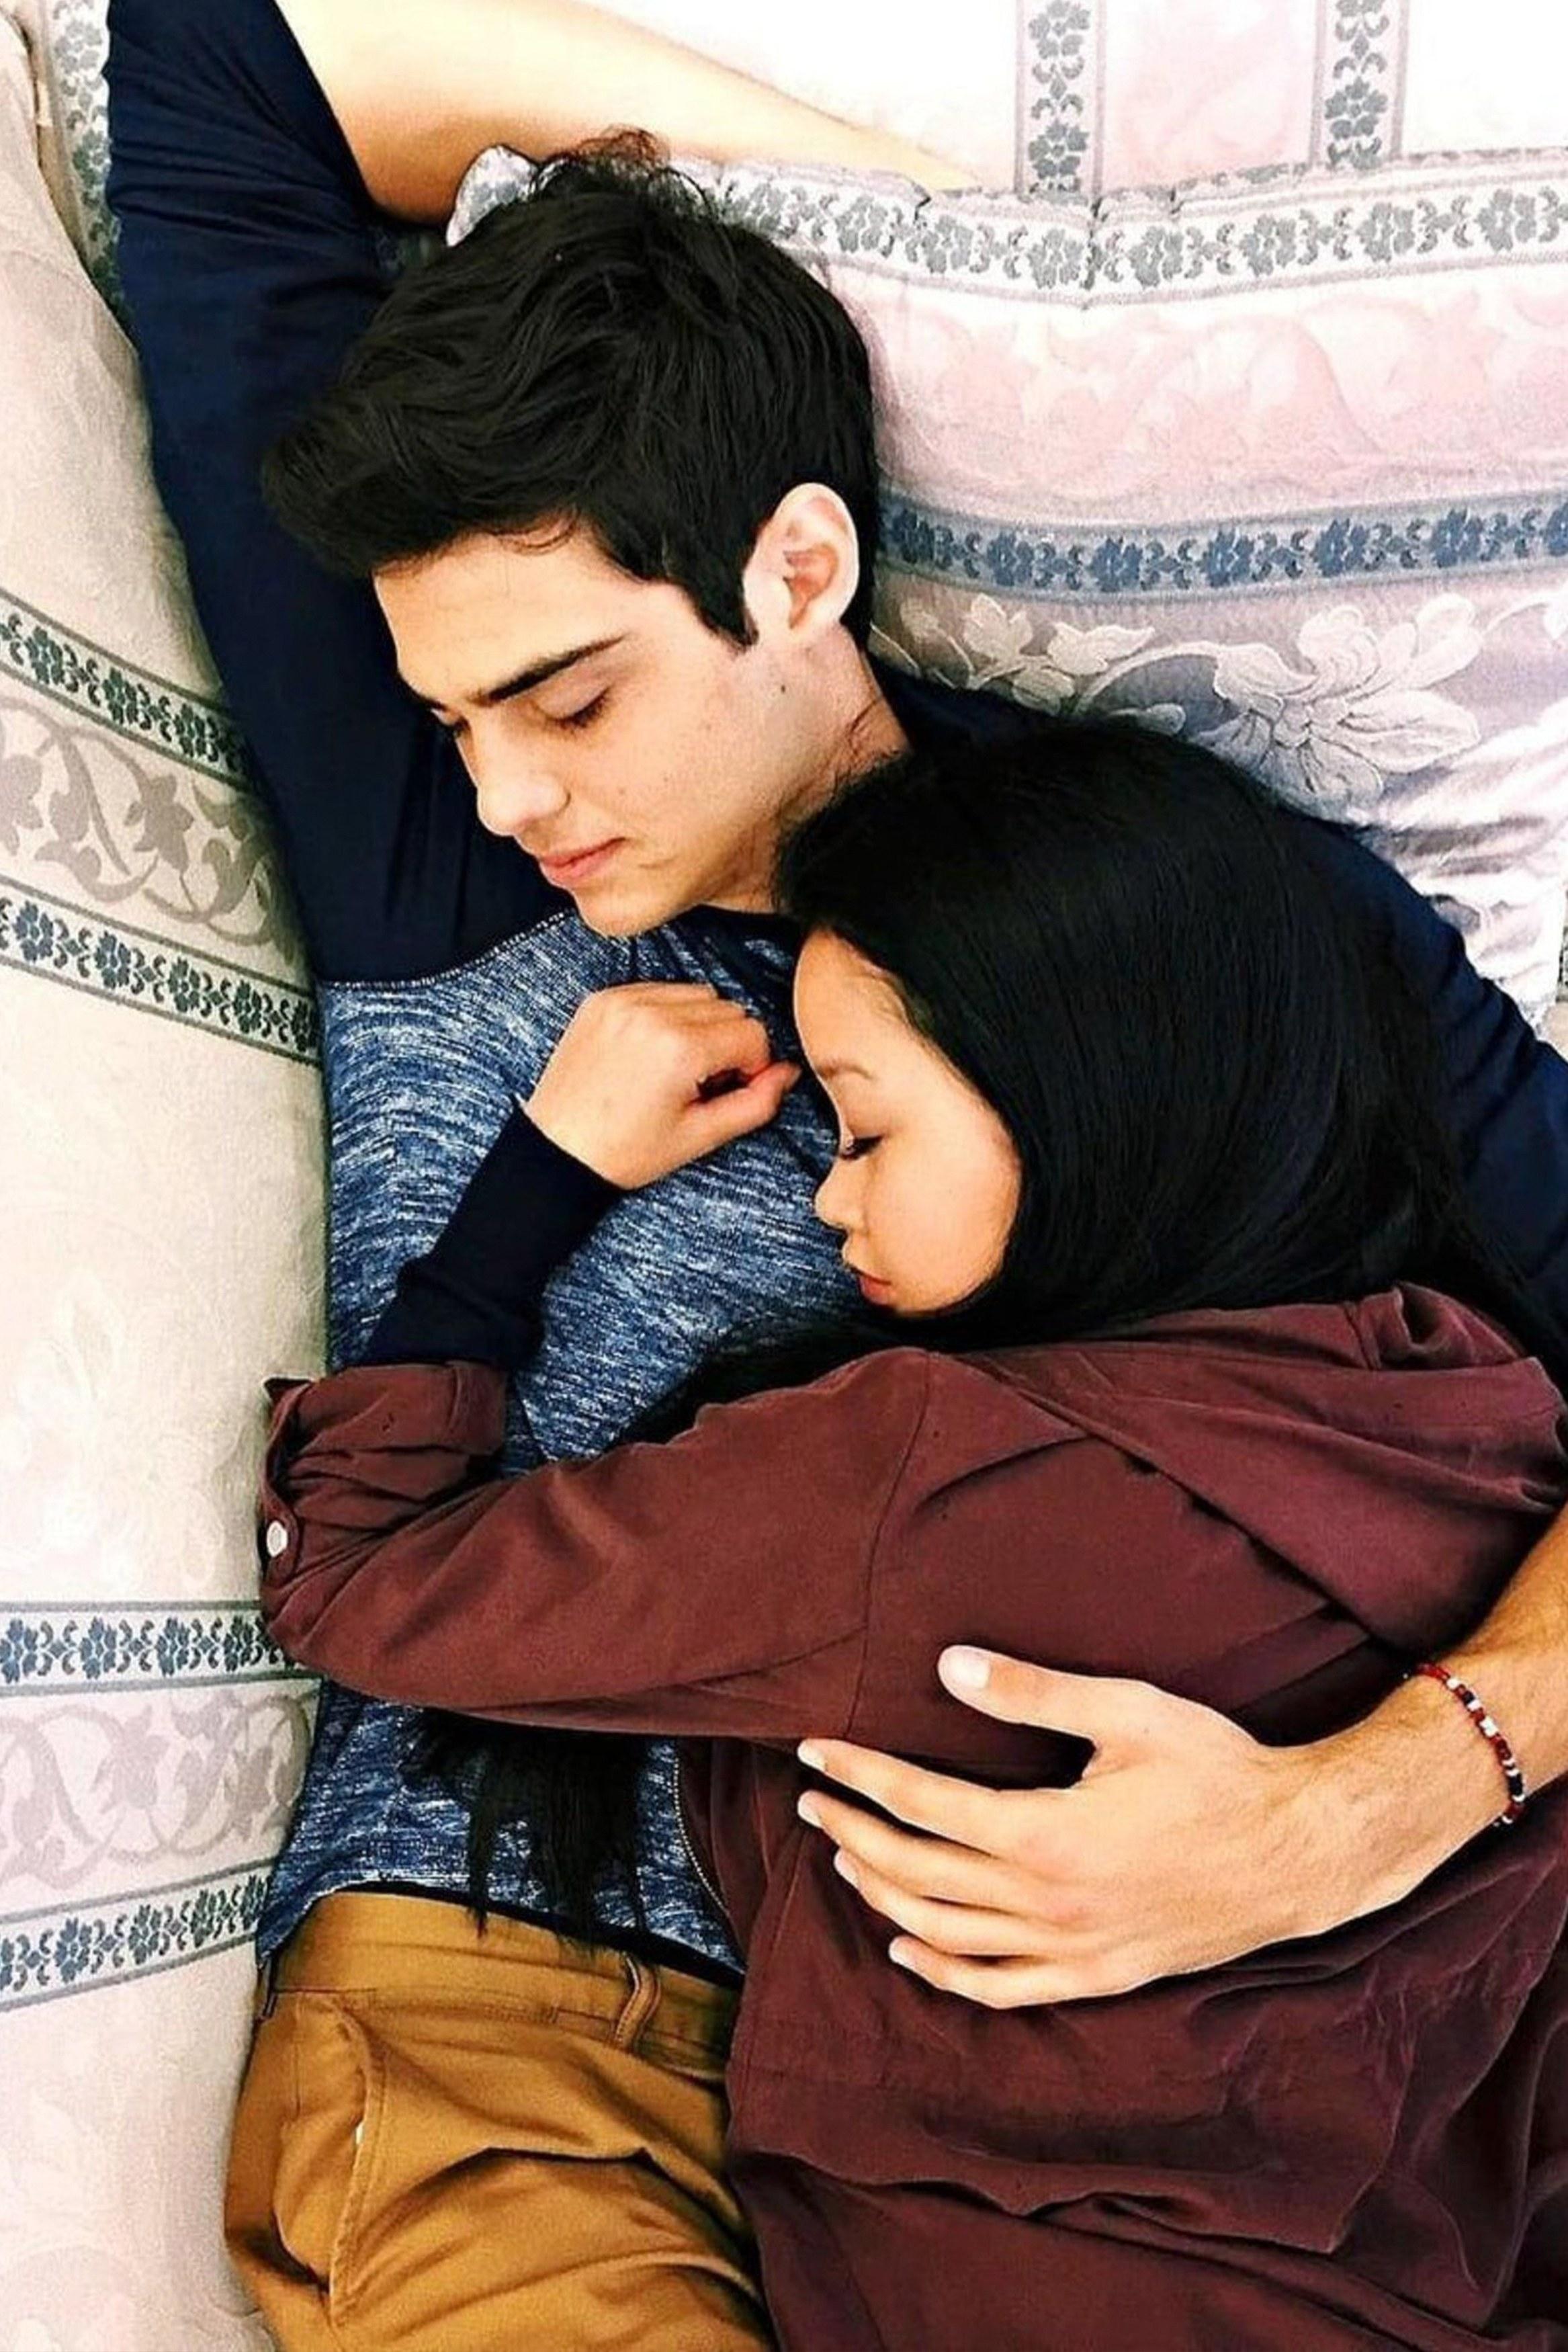 The To All The Boys I've Loved Before sequel release date has been